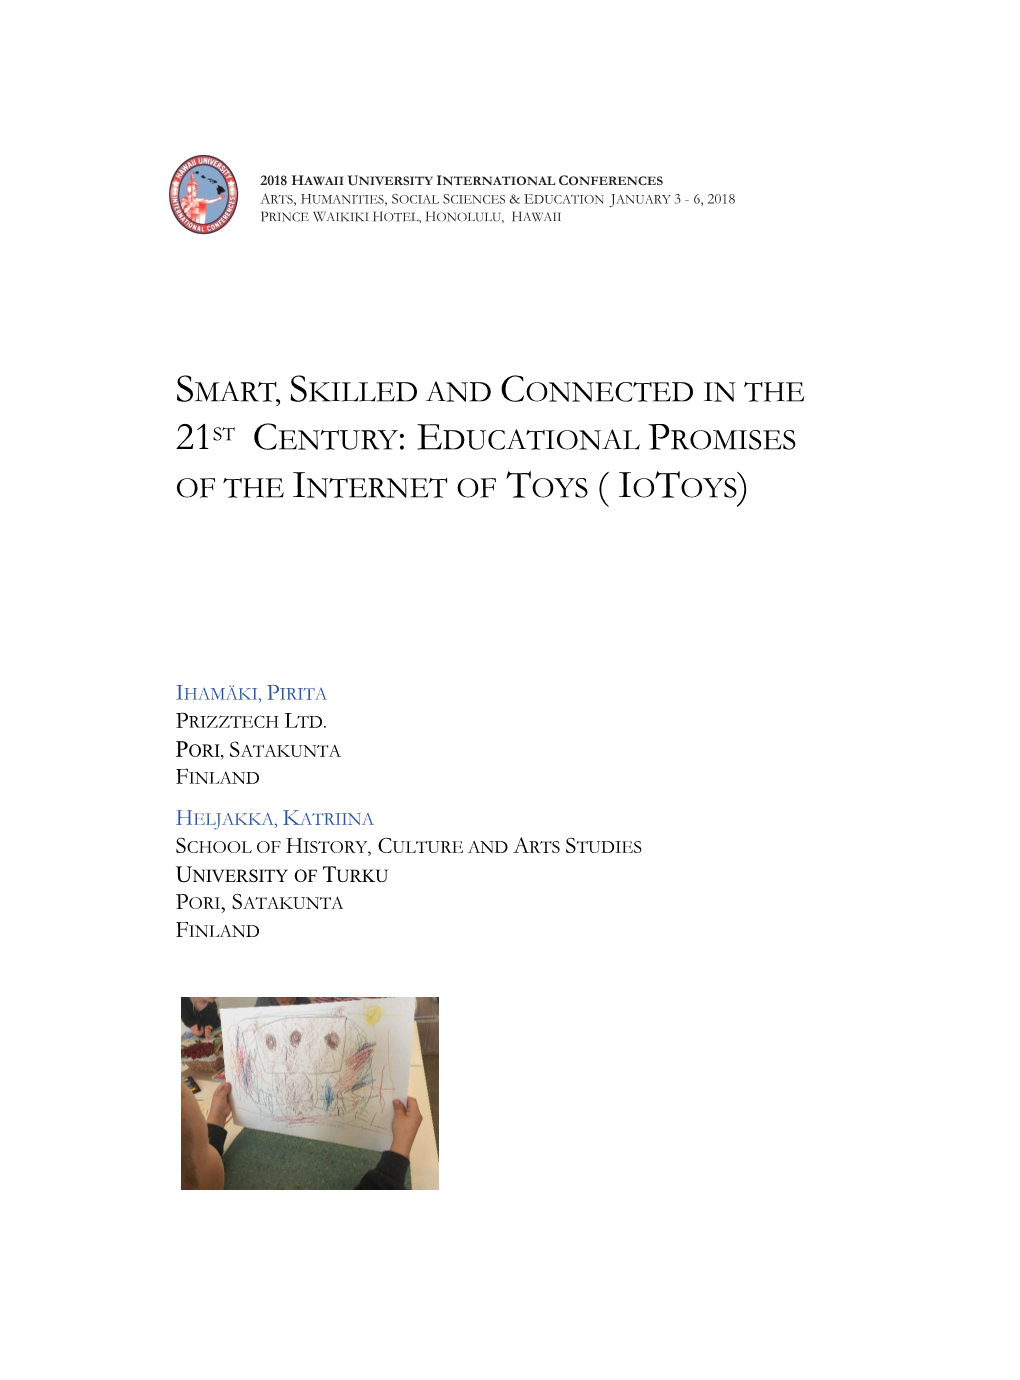 Smart, Skilled and Connected in the 21St Century: Educational Promises of the Internet of Toys ( Iotoys)